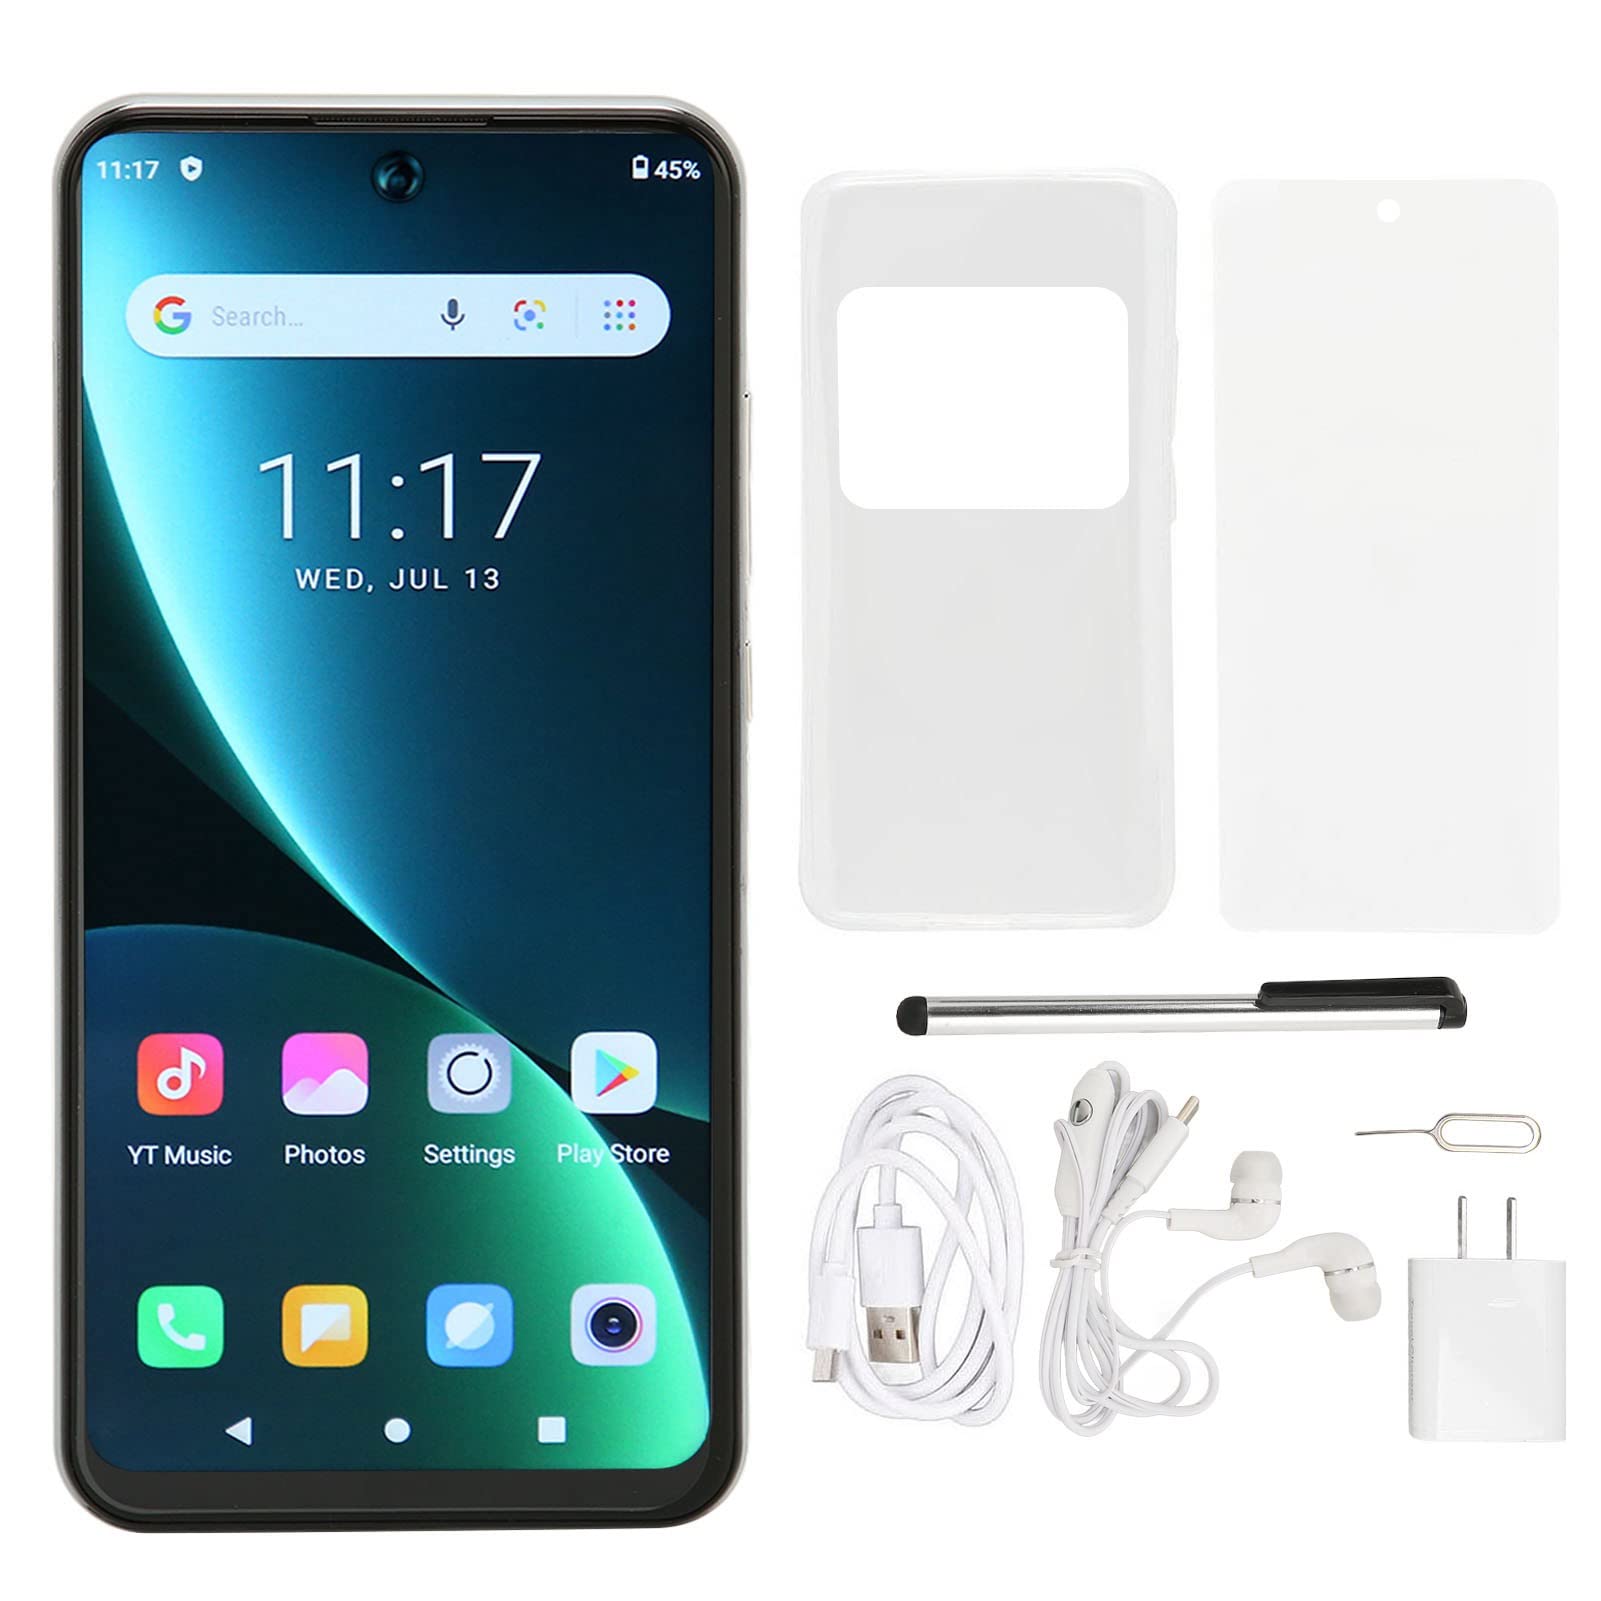 M12 Ultra Unlocked Smartphone, 6.82in HD Screen, 6GB RAM and 128GB ROM, Front 5MP Rear 16MP, 7300mAh Battery, 4G Network Phone for Android 10.0 System(USA)